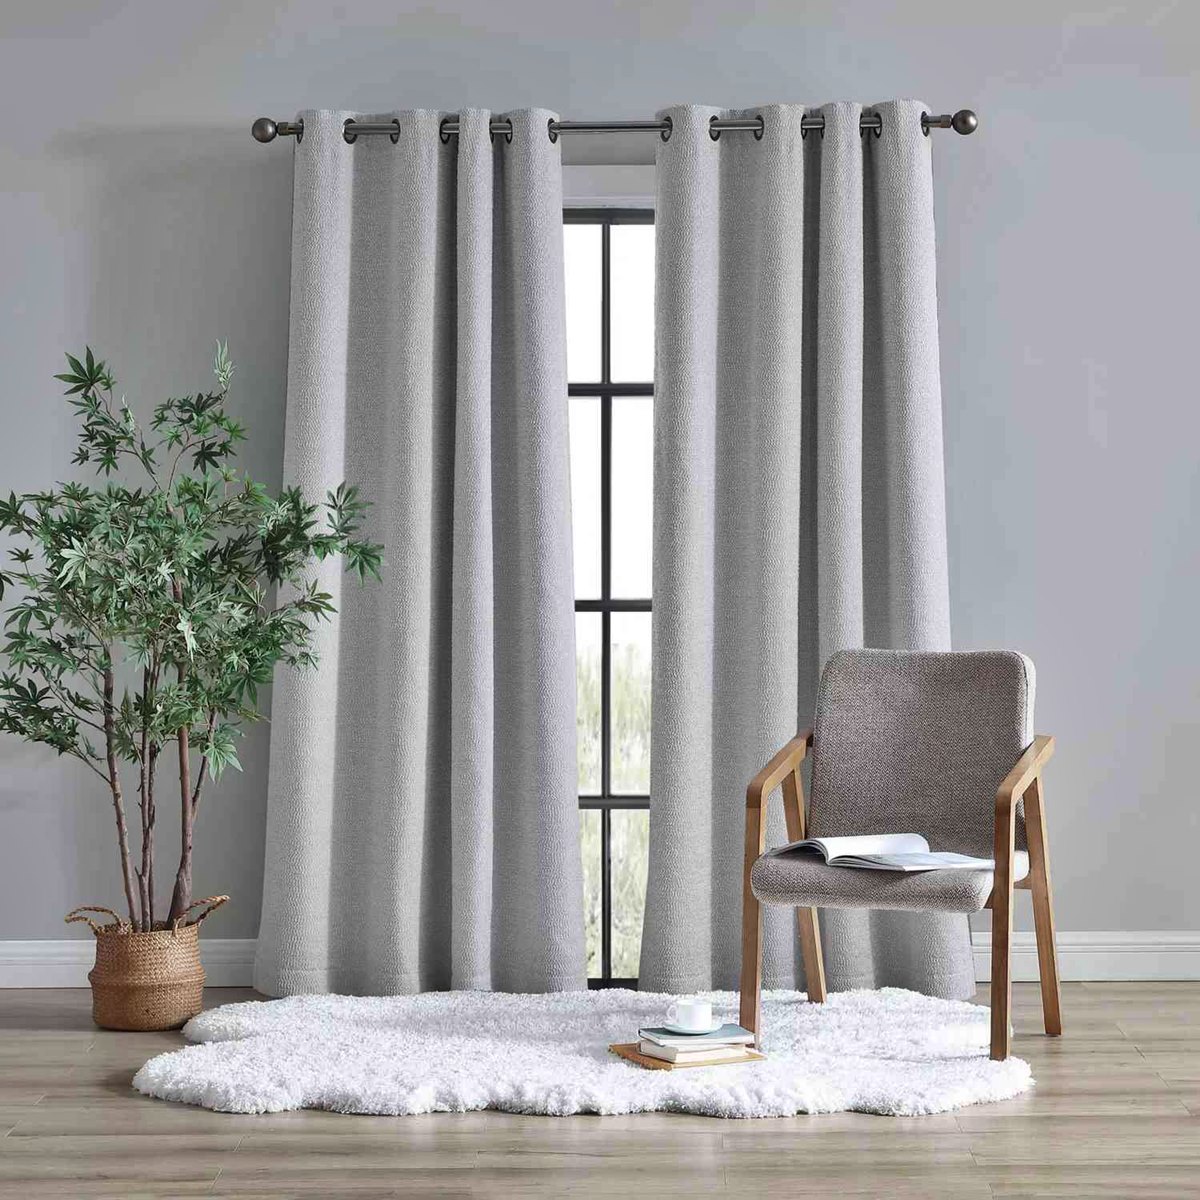 How To Make A Blackout Curtain